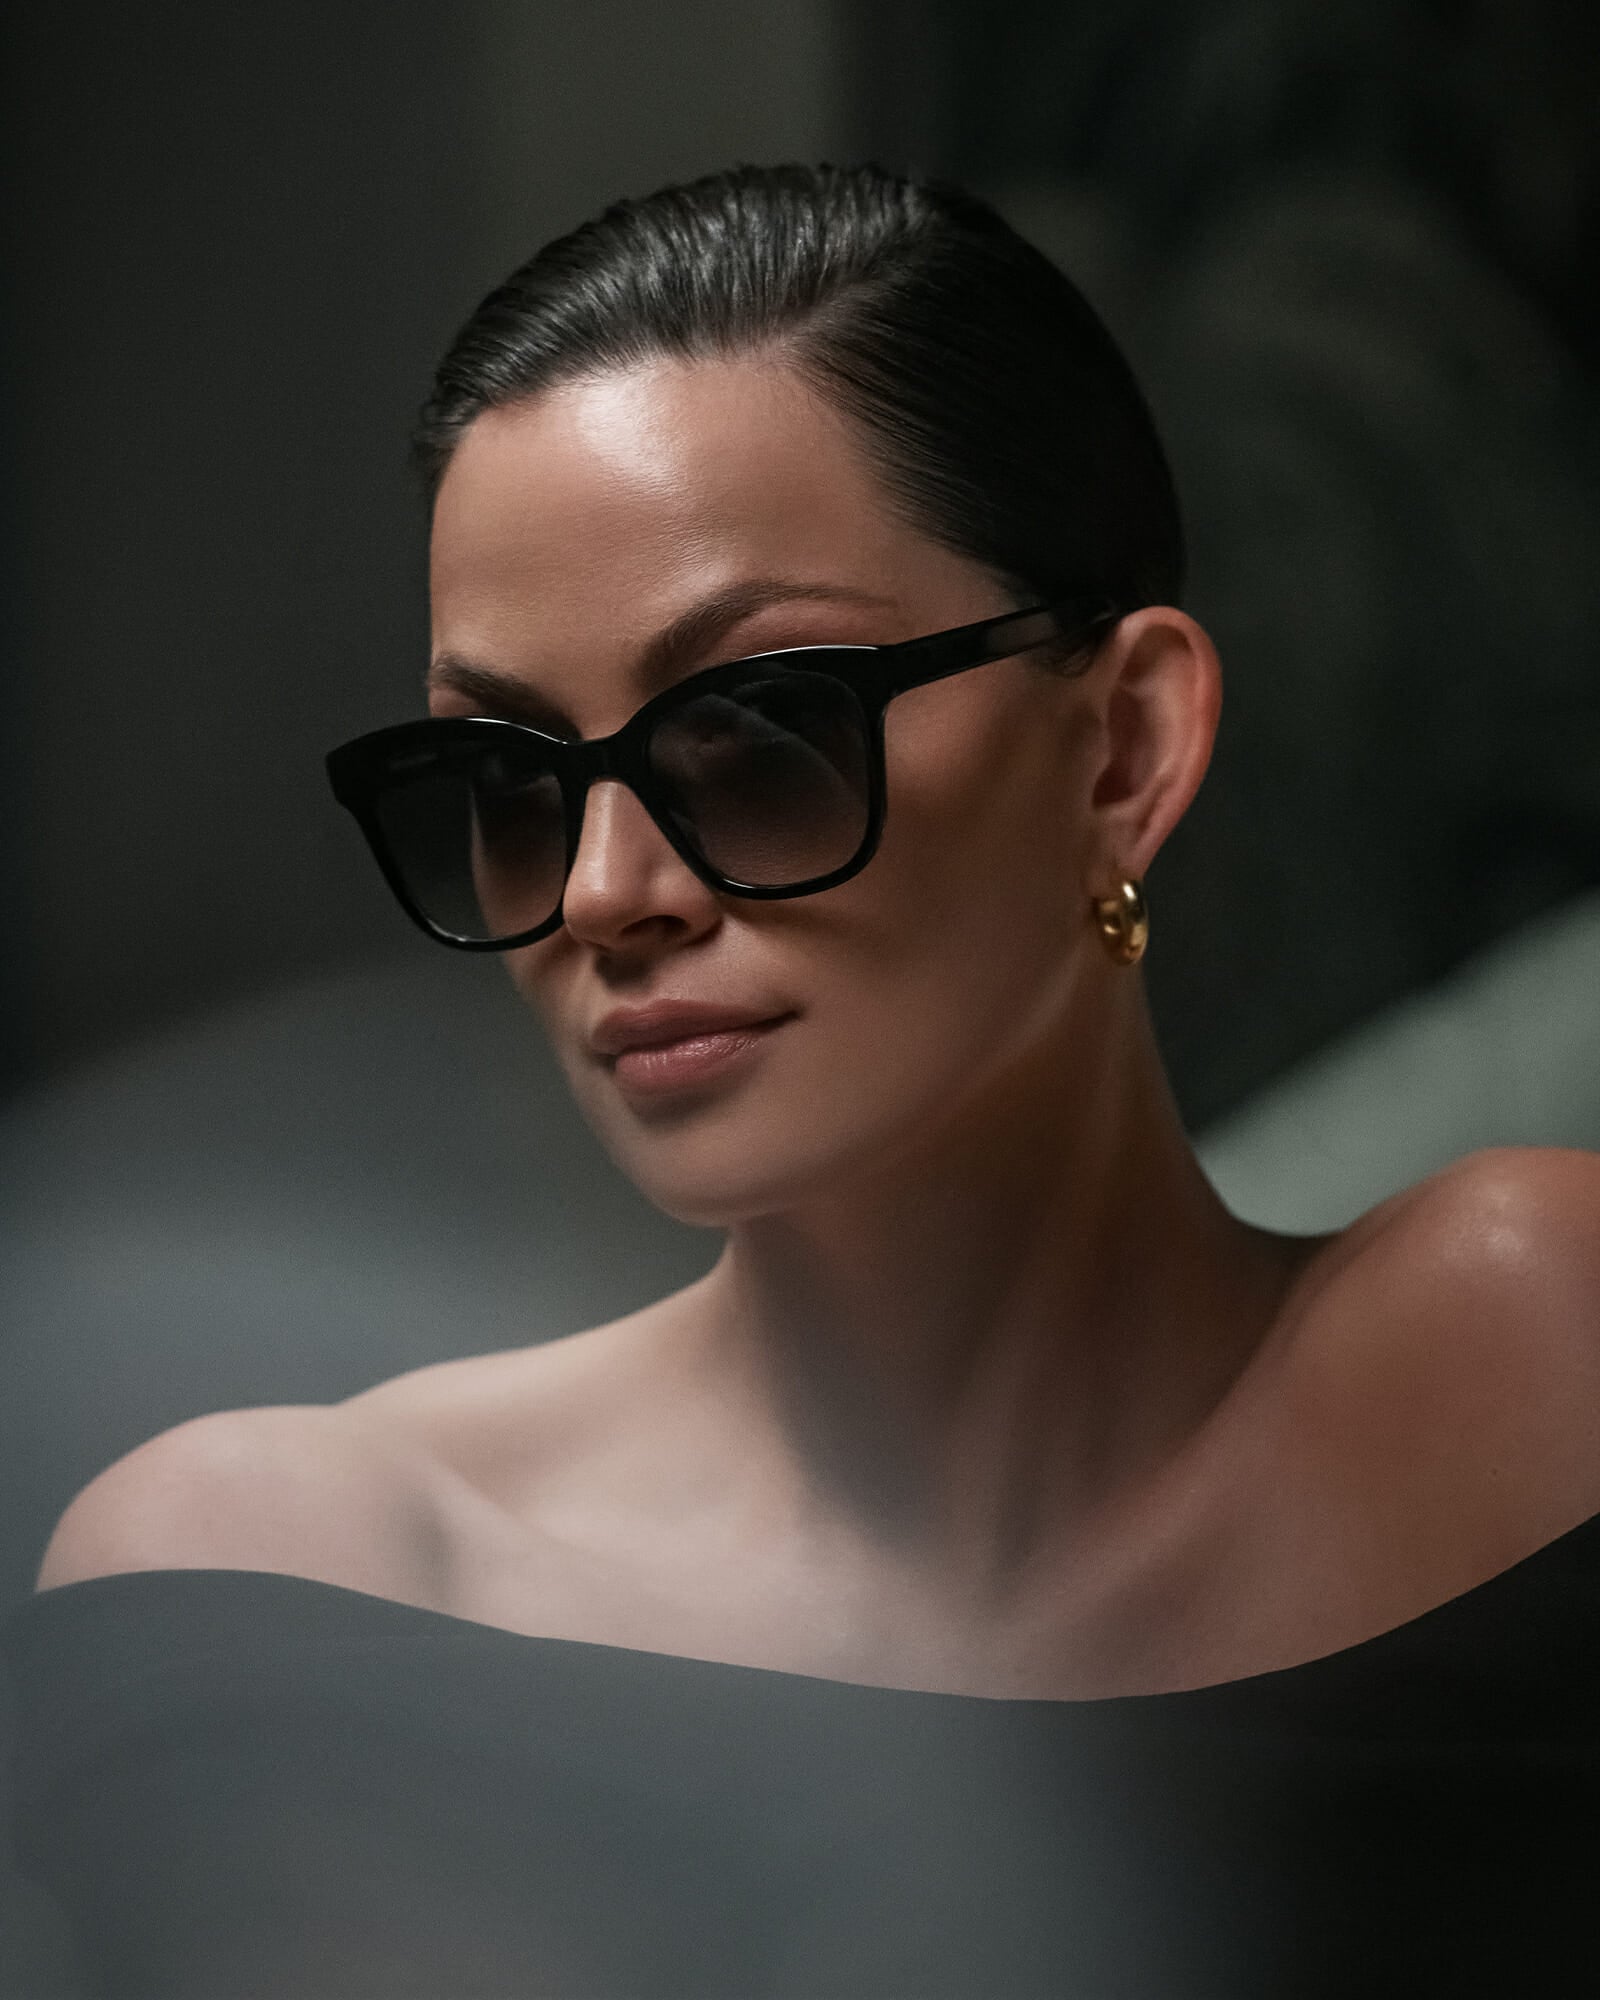 Portrait of an elegant brown haired woman who is looking into the camera. She is wearing black acetat sunglasses and e black strapless dress and golden earrings.